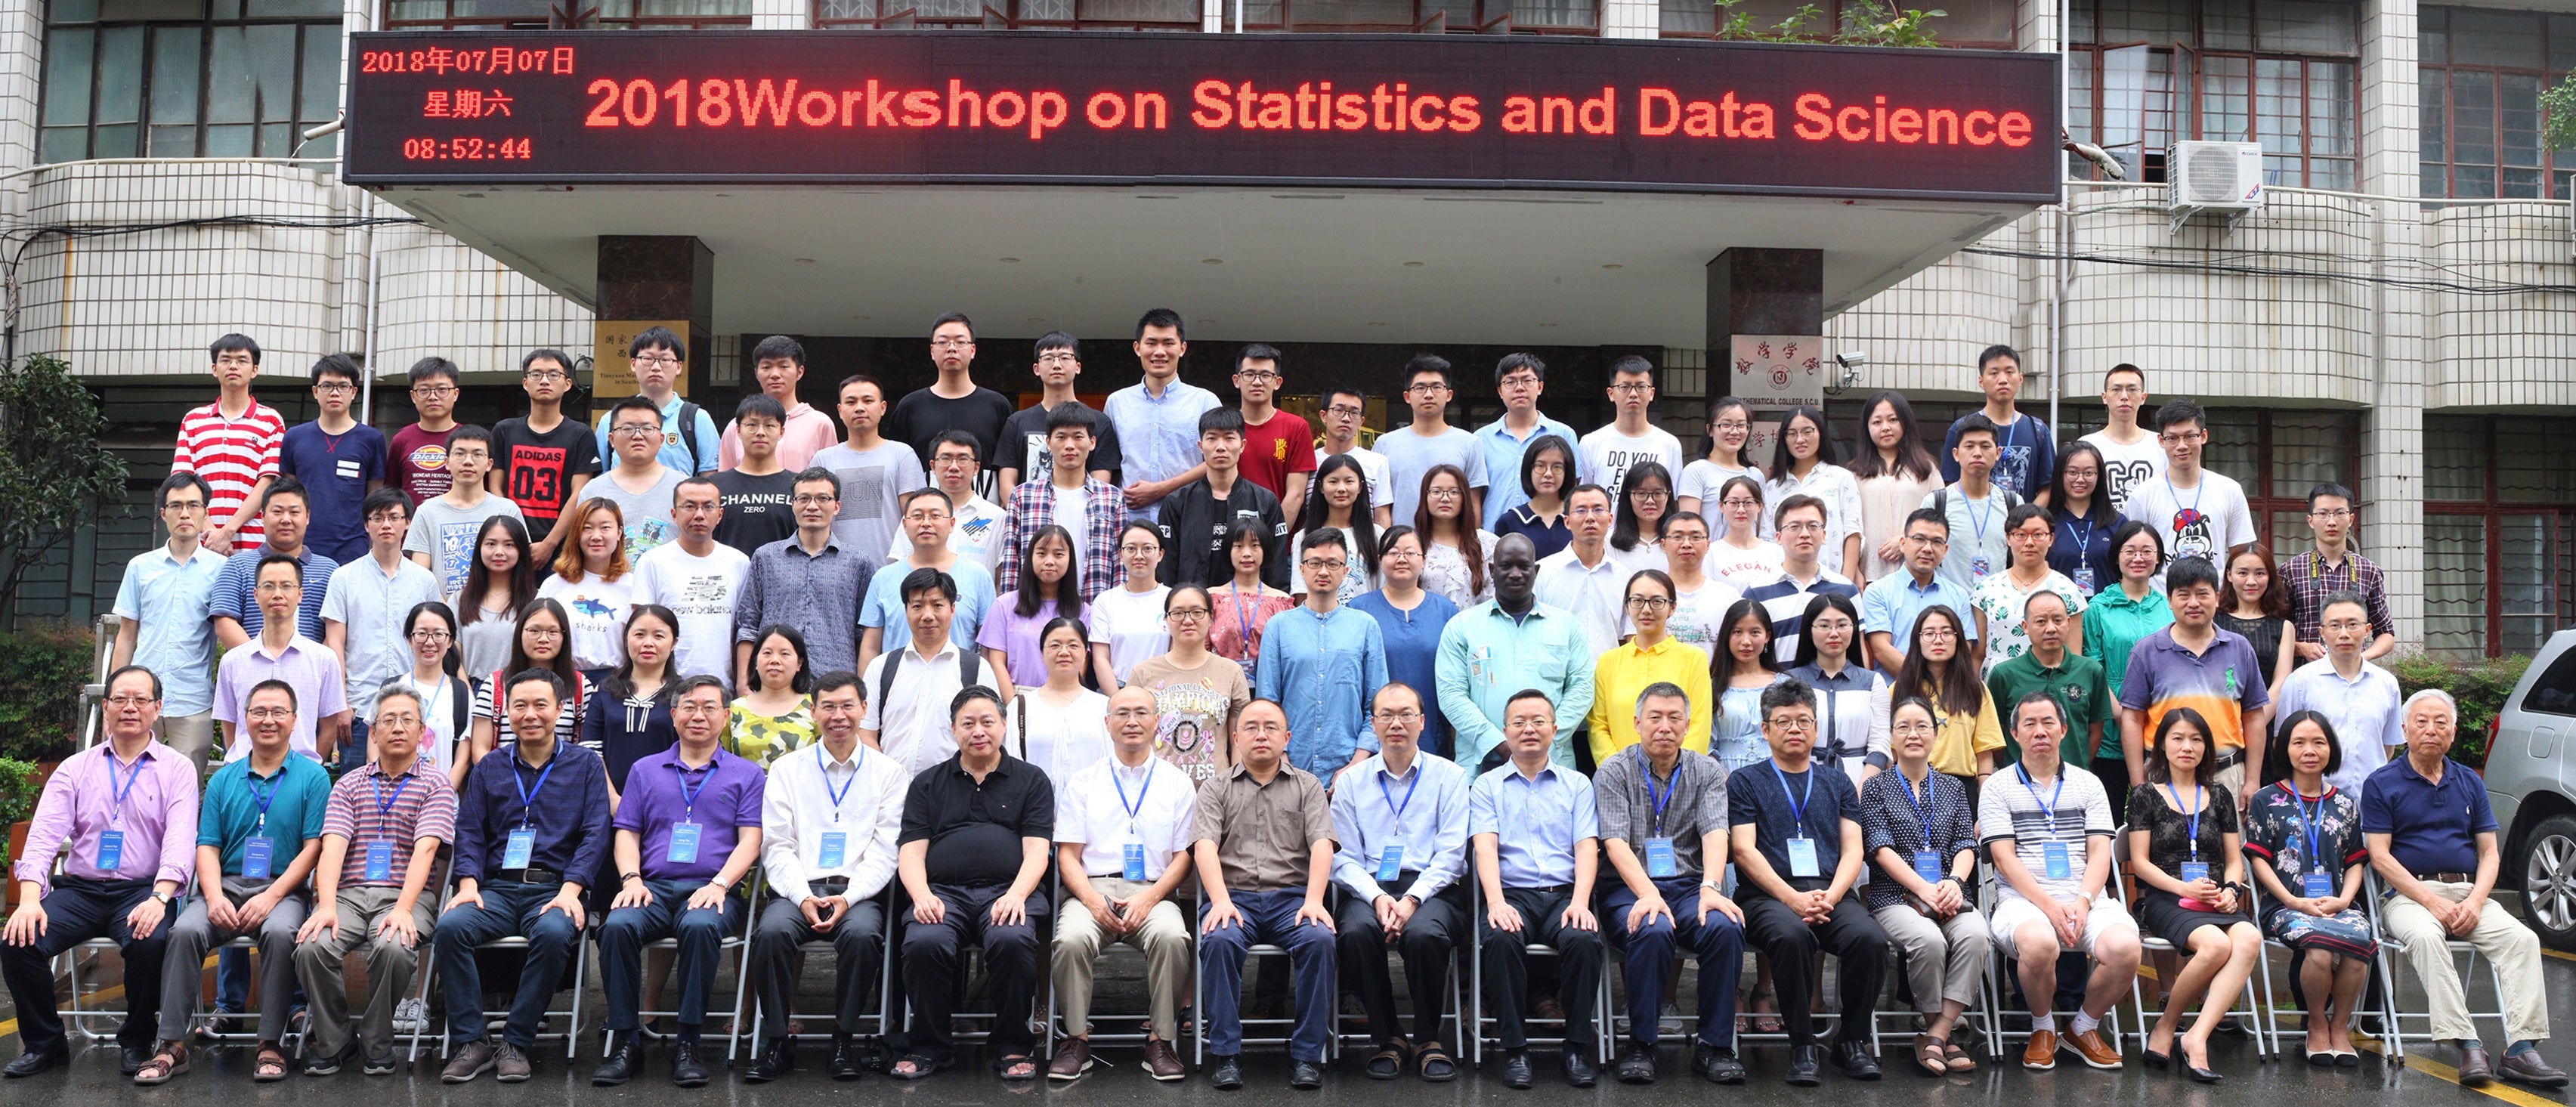 Dr. Ming Tan at 2018 Statistics and Data Science Workshop in Chengdu.